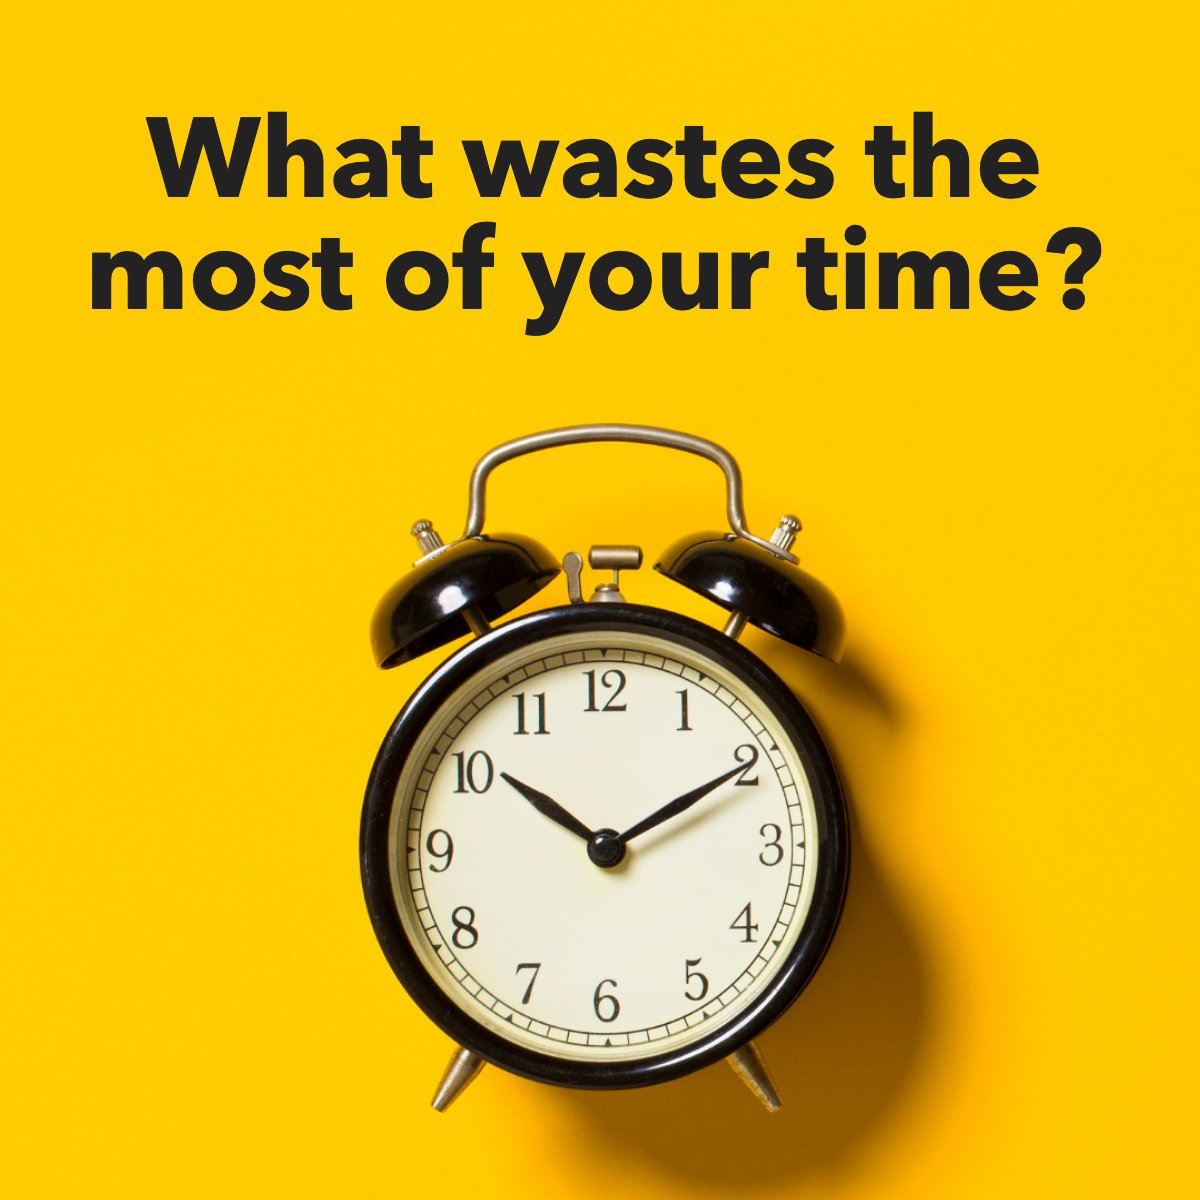 Nowadays, time is gold! ✨

What wastes your time the most? 🧭

#clock #timemanagement #timesup #timeshare #timekeeper #allthetime
 #Gastonia #GastonHomeOfTheWeek #HanksRealtyGroup #HRG #RealEstateExperts #GastonRealEstate #GastonHomeForSale #GastonOutside